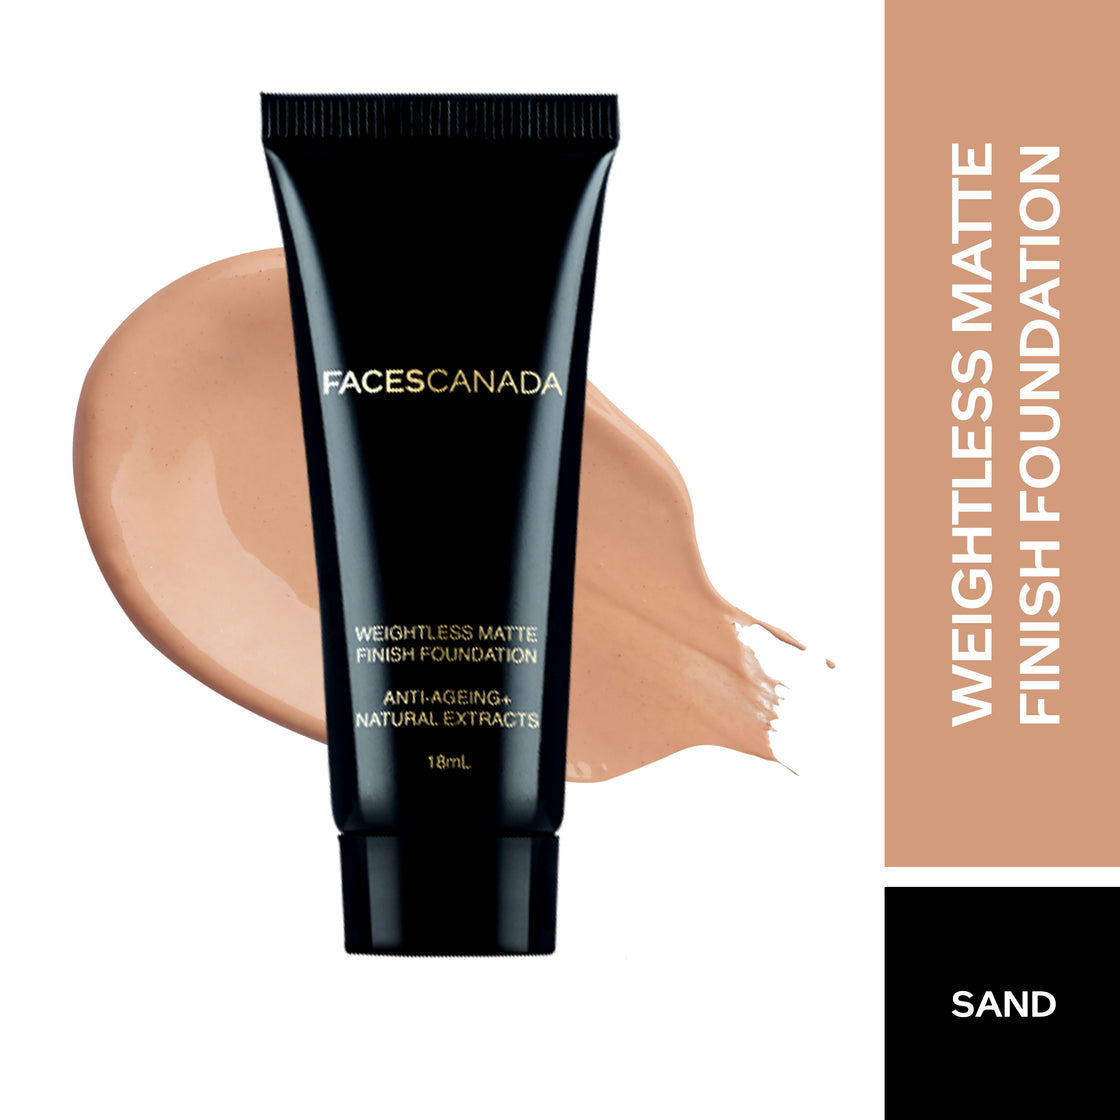 Faces Canada Weightless Matte Finish Foundation Sand 04 18Ml